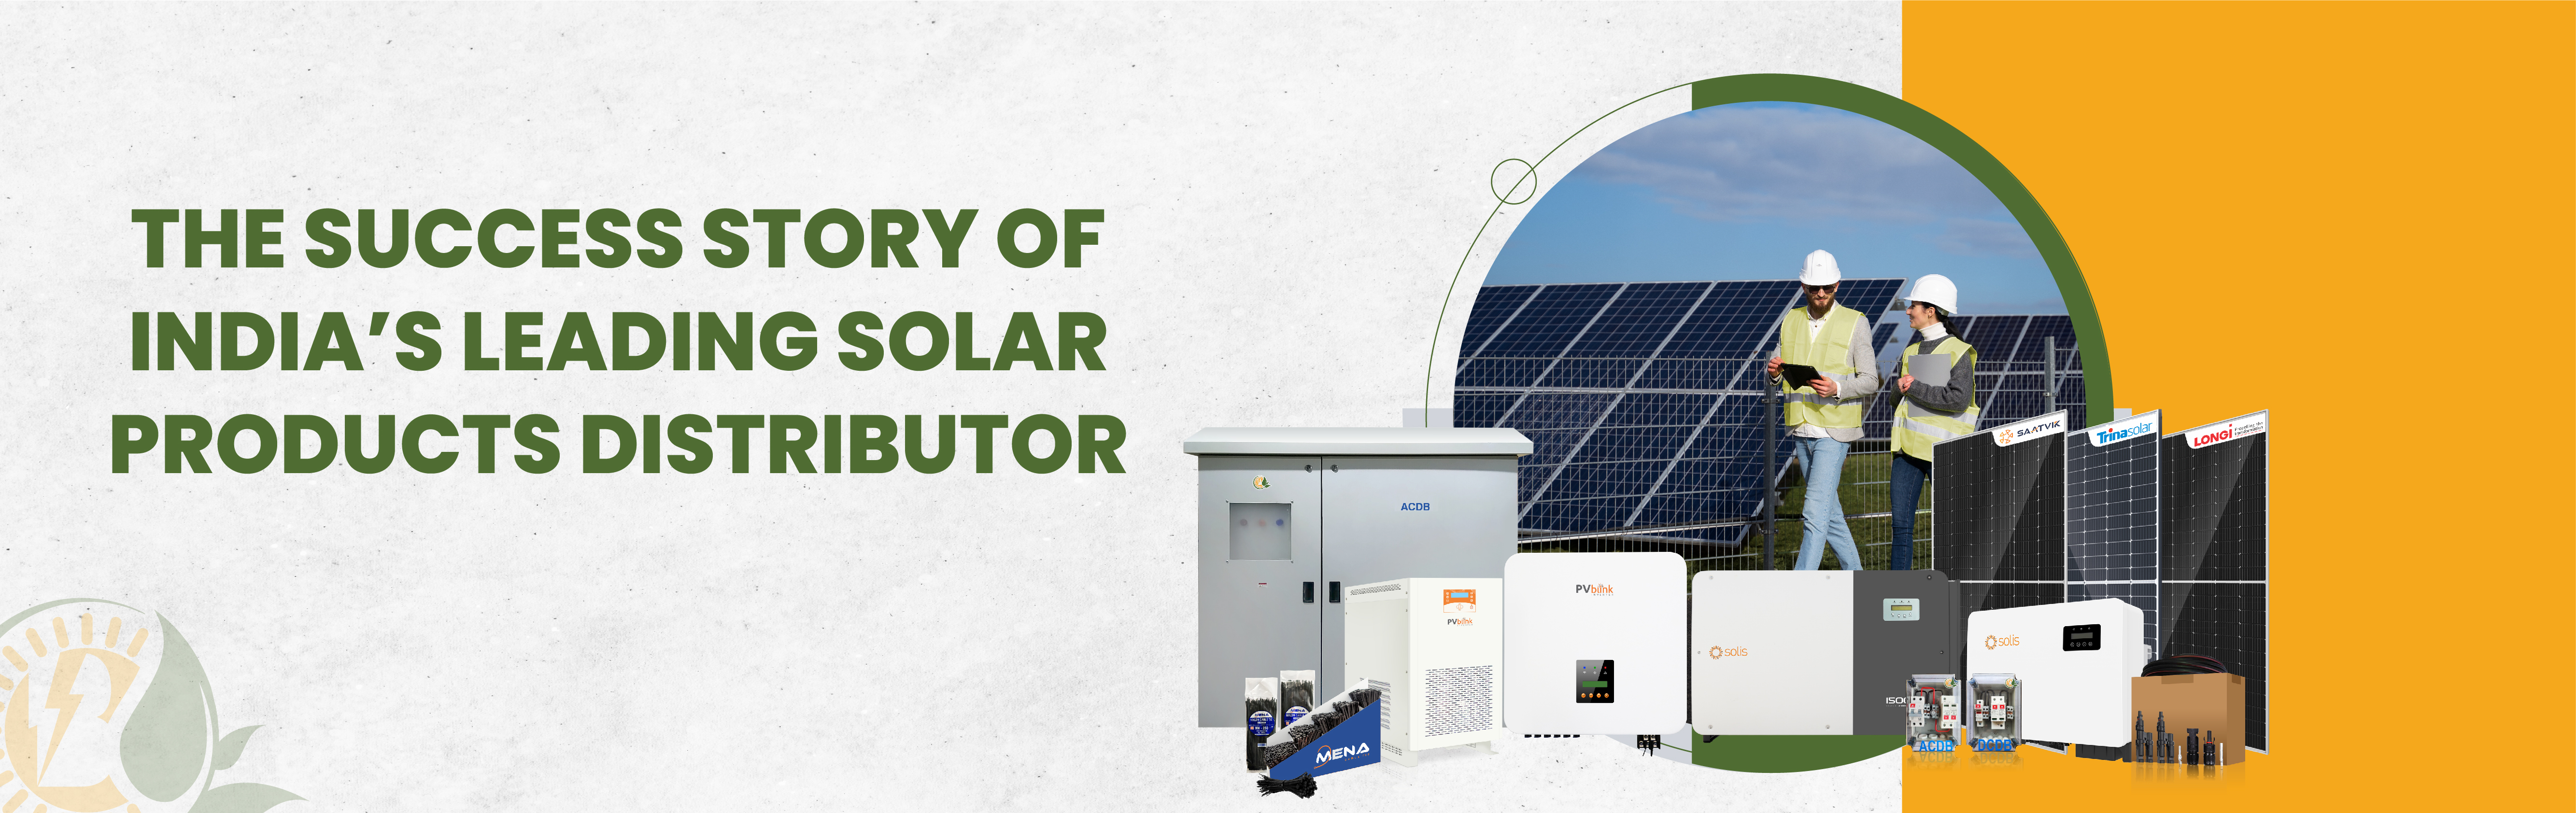 The Success Story of India’s Leading Solar Products Distributor